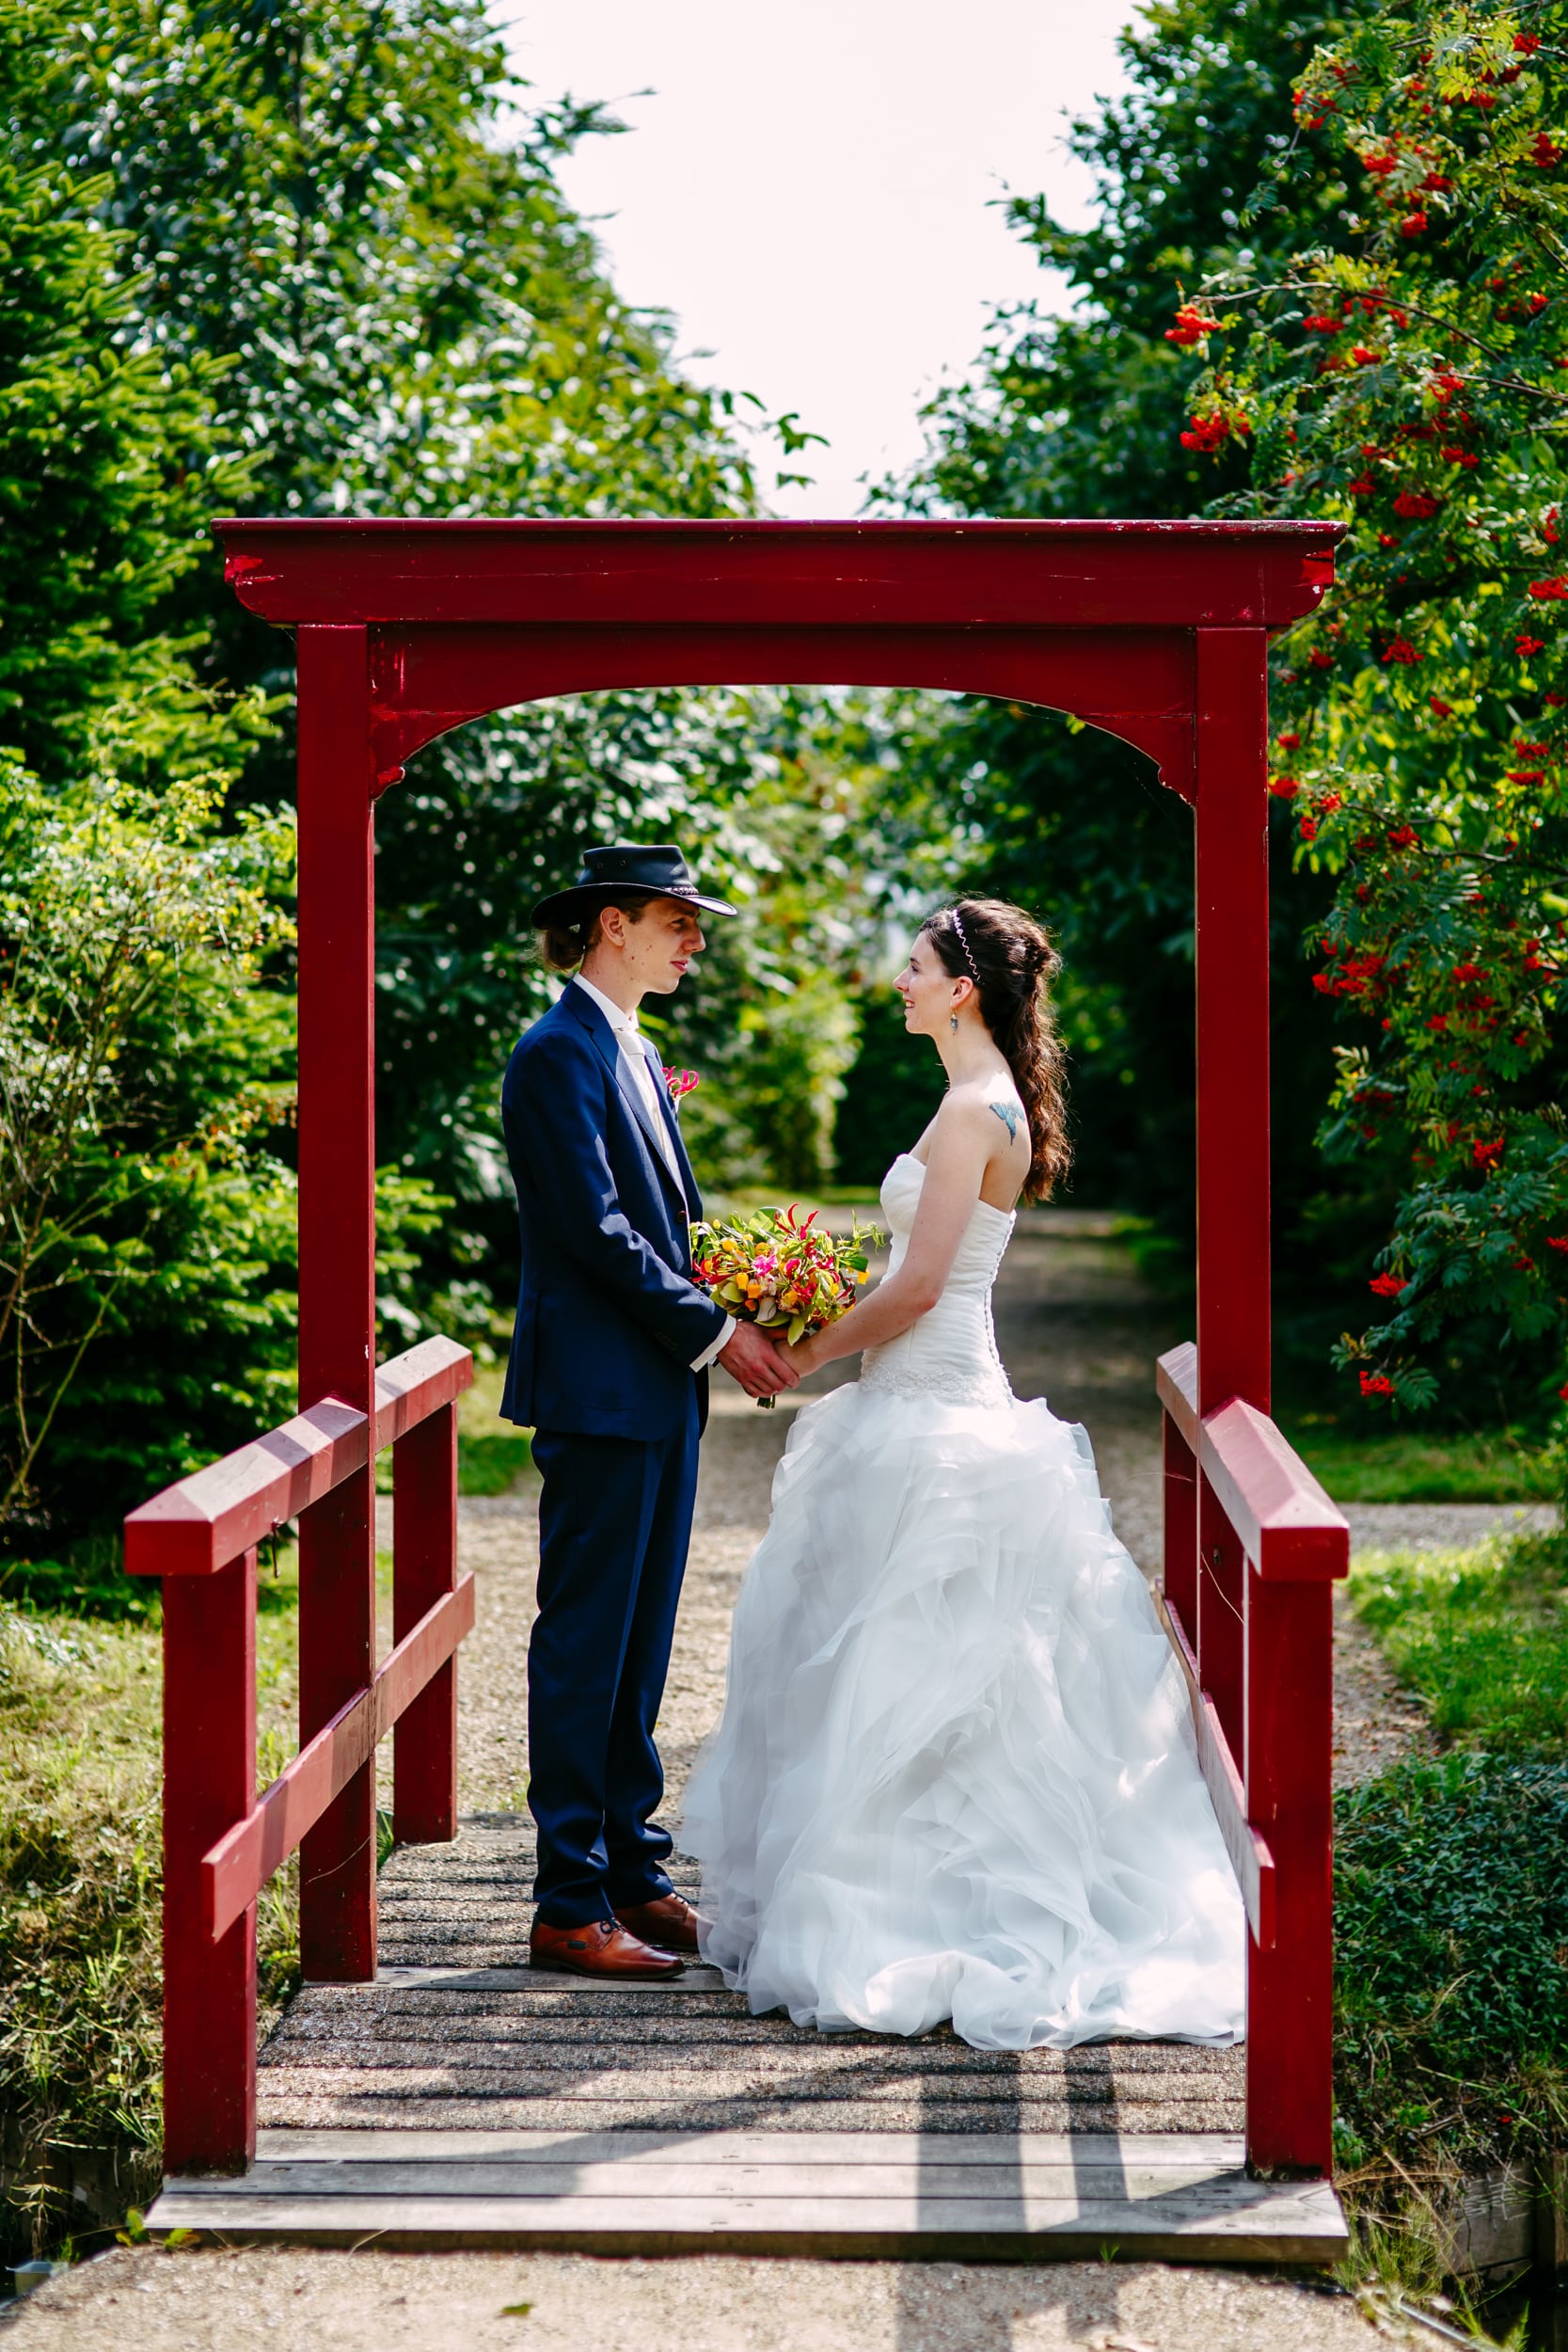 A budget bride and groom stand on a red bridge in a garden and enjoy their cheap wedding.